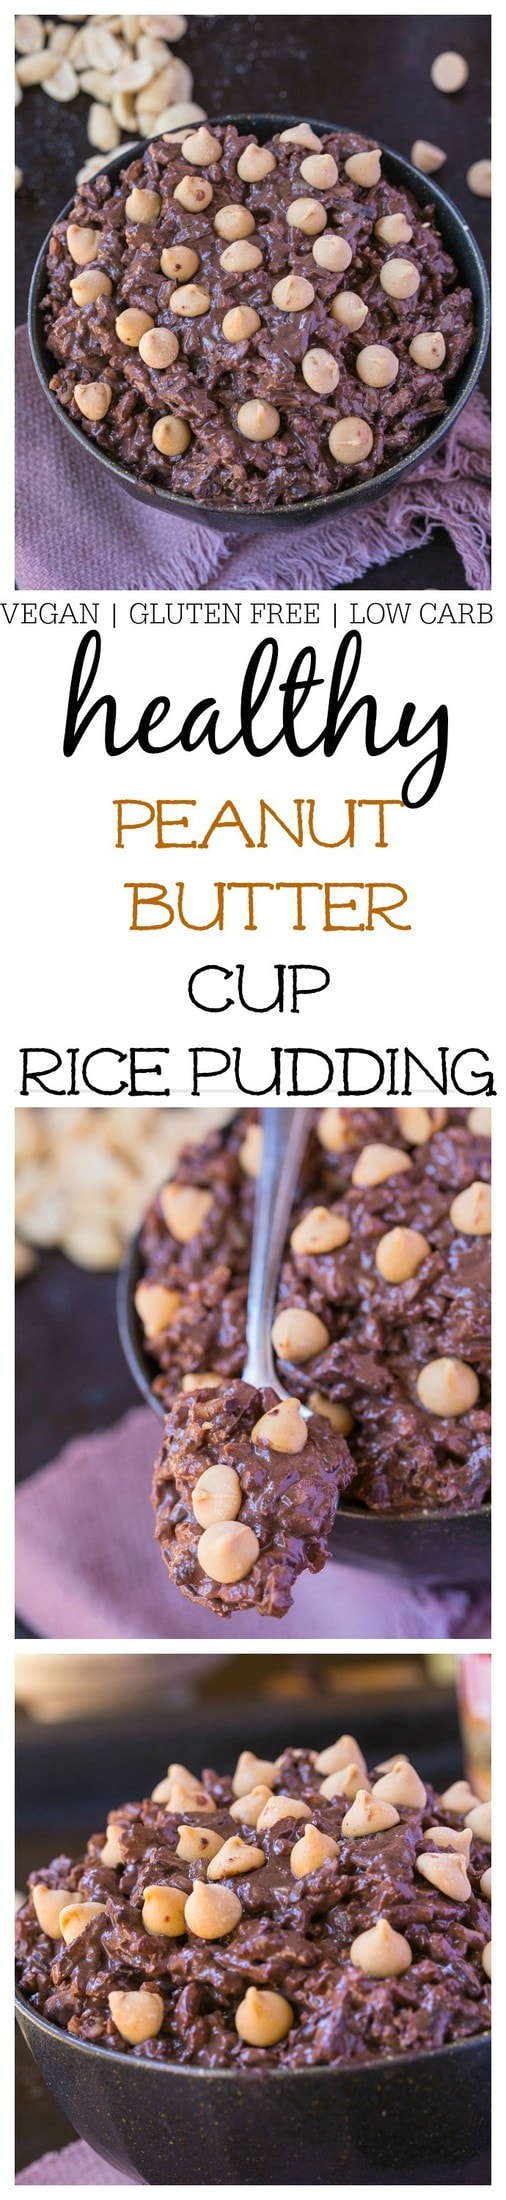 Healthy Peanut Butter Cup Rice Pudding- Packed full of protein and peanut butter chocolate goodness, this healthy rice pudding tastes exactly like a peanut butter cup minus the added sugars, fats and other nasties! Ready in less than 10 minutes, it's perfect for a make ahead breakfast or made in a batch for an after dinner treat- Vegan, gluten free, dairy free AND a low carb option!  @thebigmansworld- thebigmansworld.com